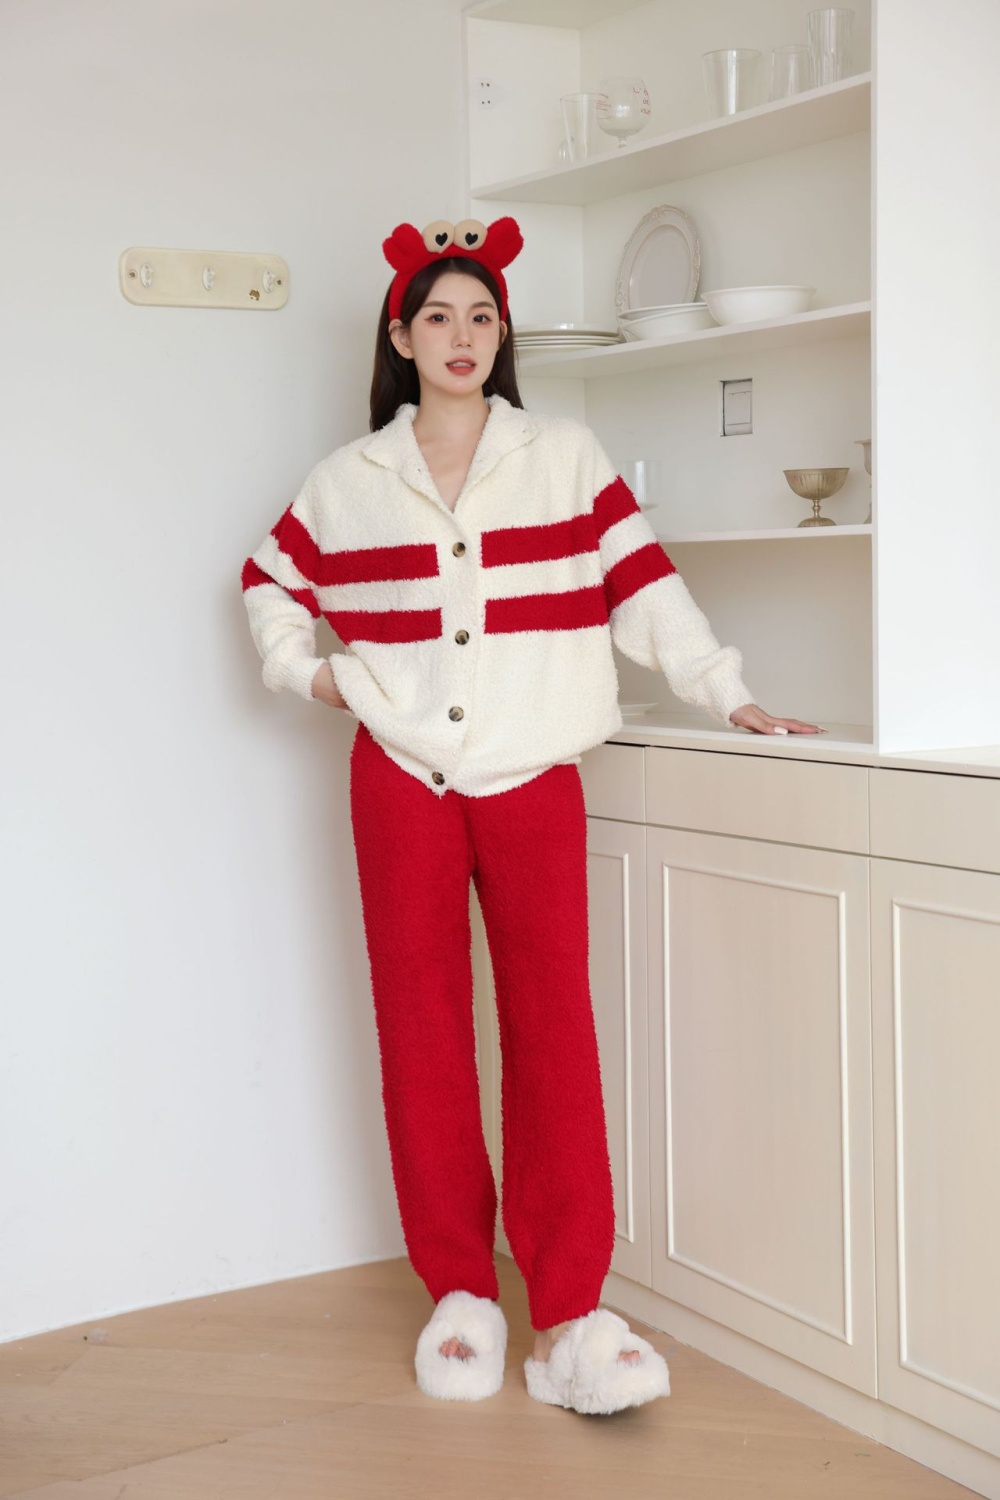 Winter thermal cardigan soft pajamas a set for women